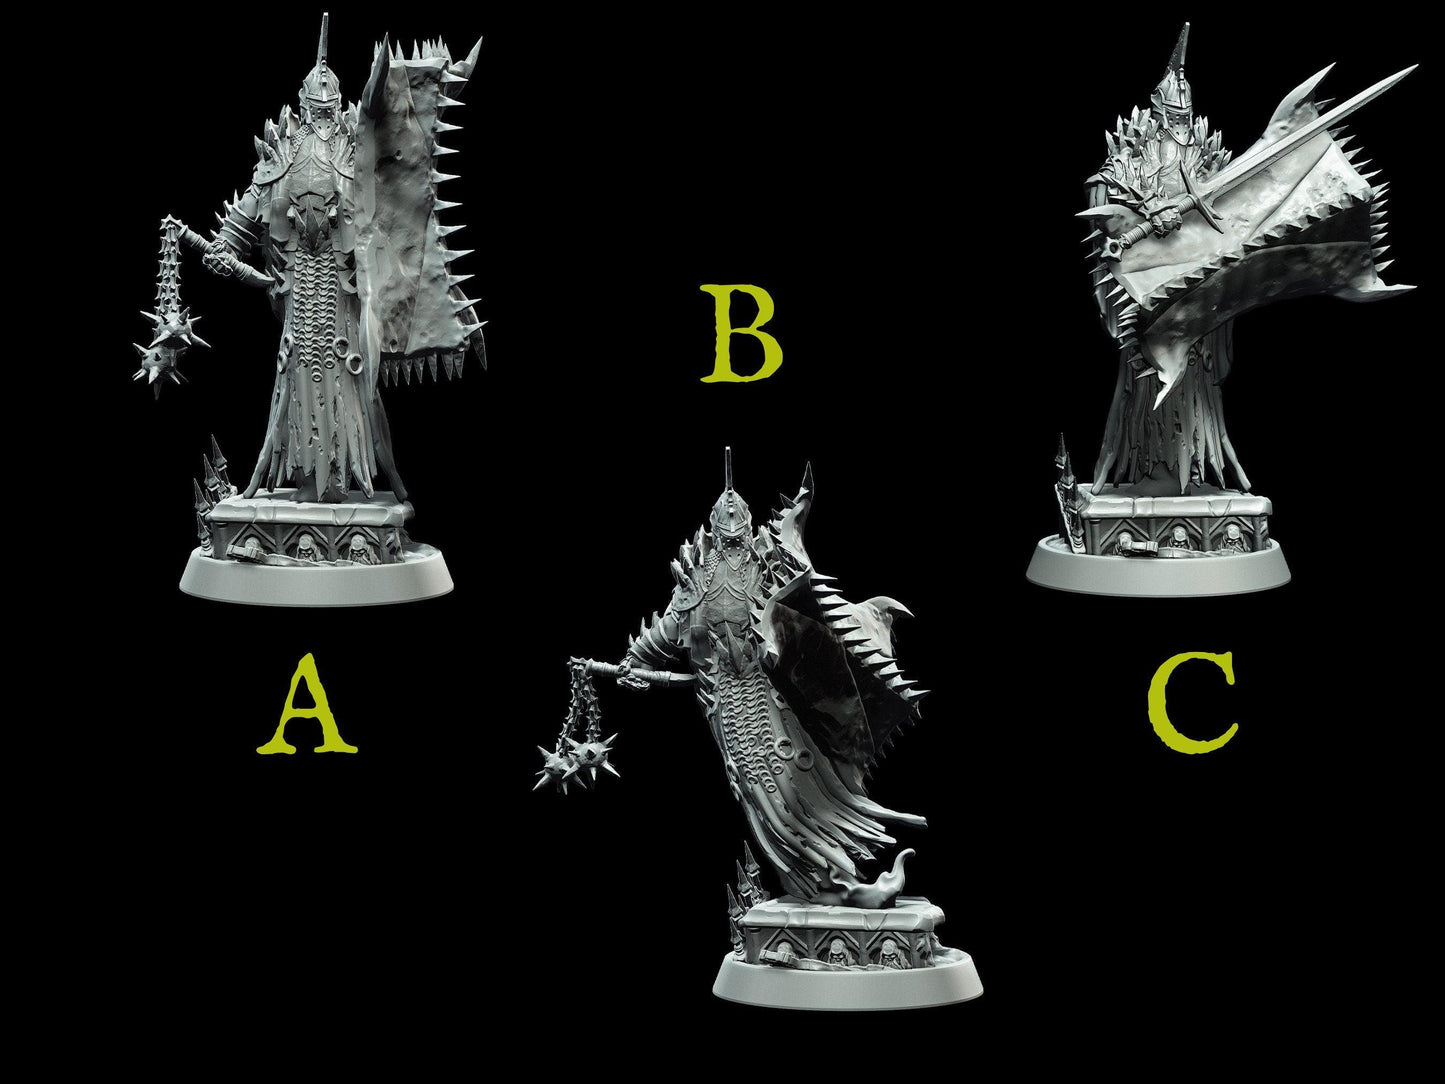 Fallen Crusader Miniature | 3 Poses | 28mm scale Tabletop gaming DnD Miniature Dungeons and Dragons, corrupted miniature dnd 5e - Plague Miniatures shop for DnD Miniatures